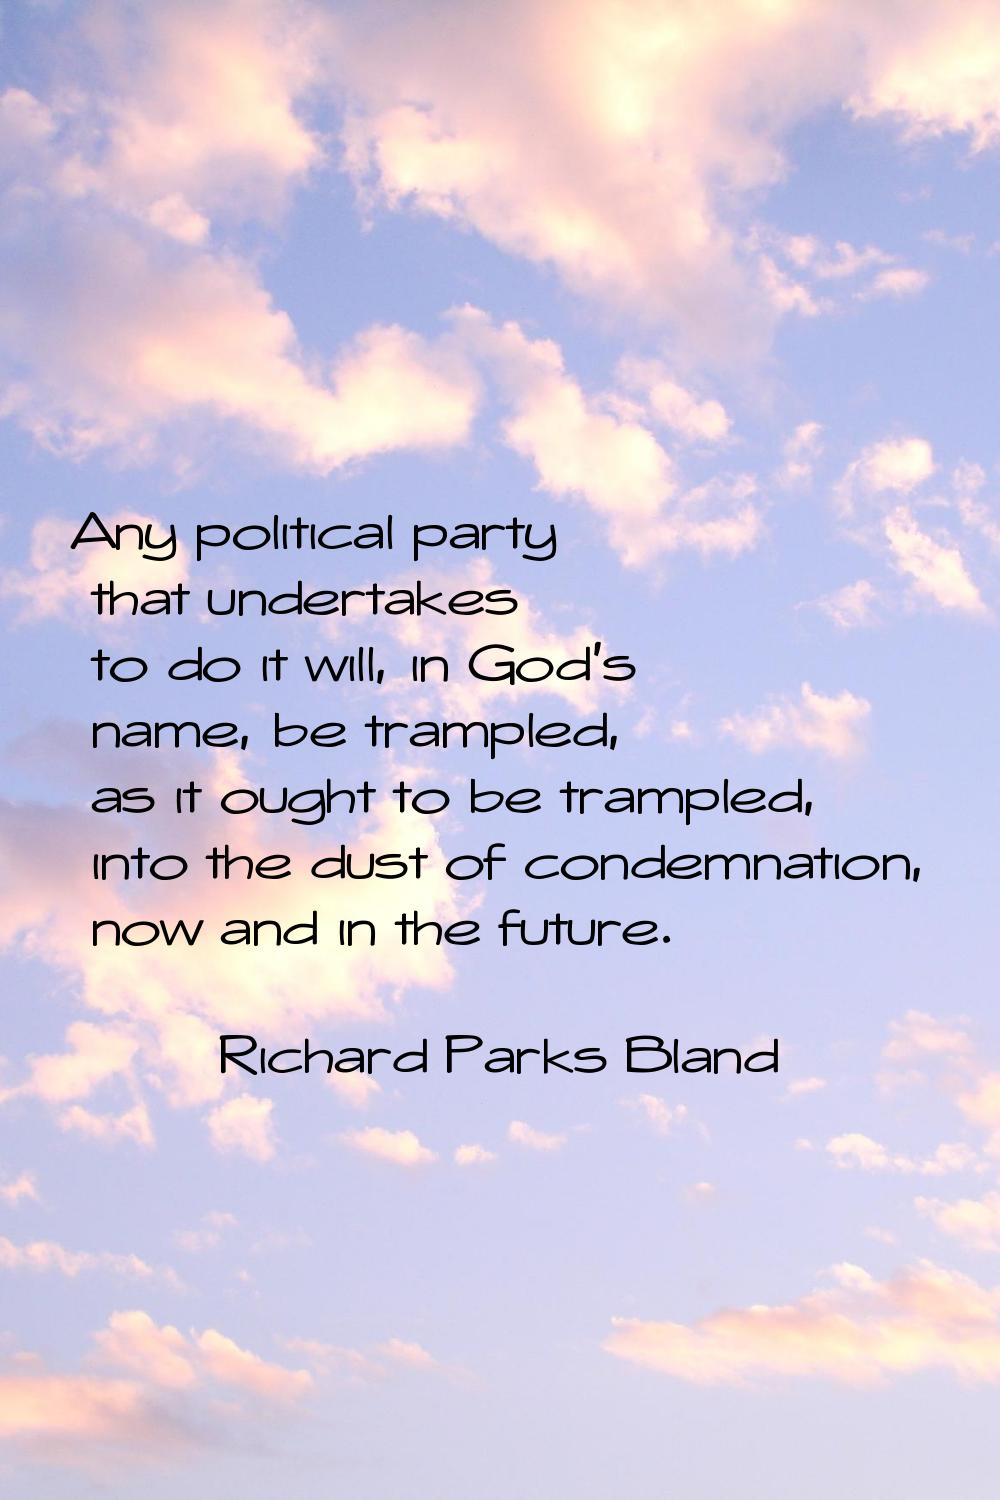 Any political party that undertakes to do it will, in God's name, be trampled, as it ought to be tr